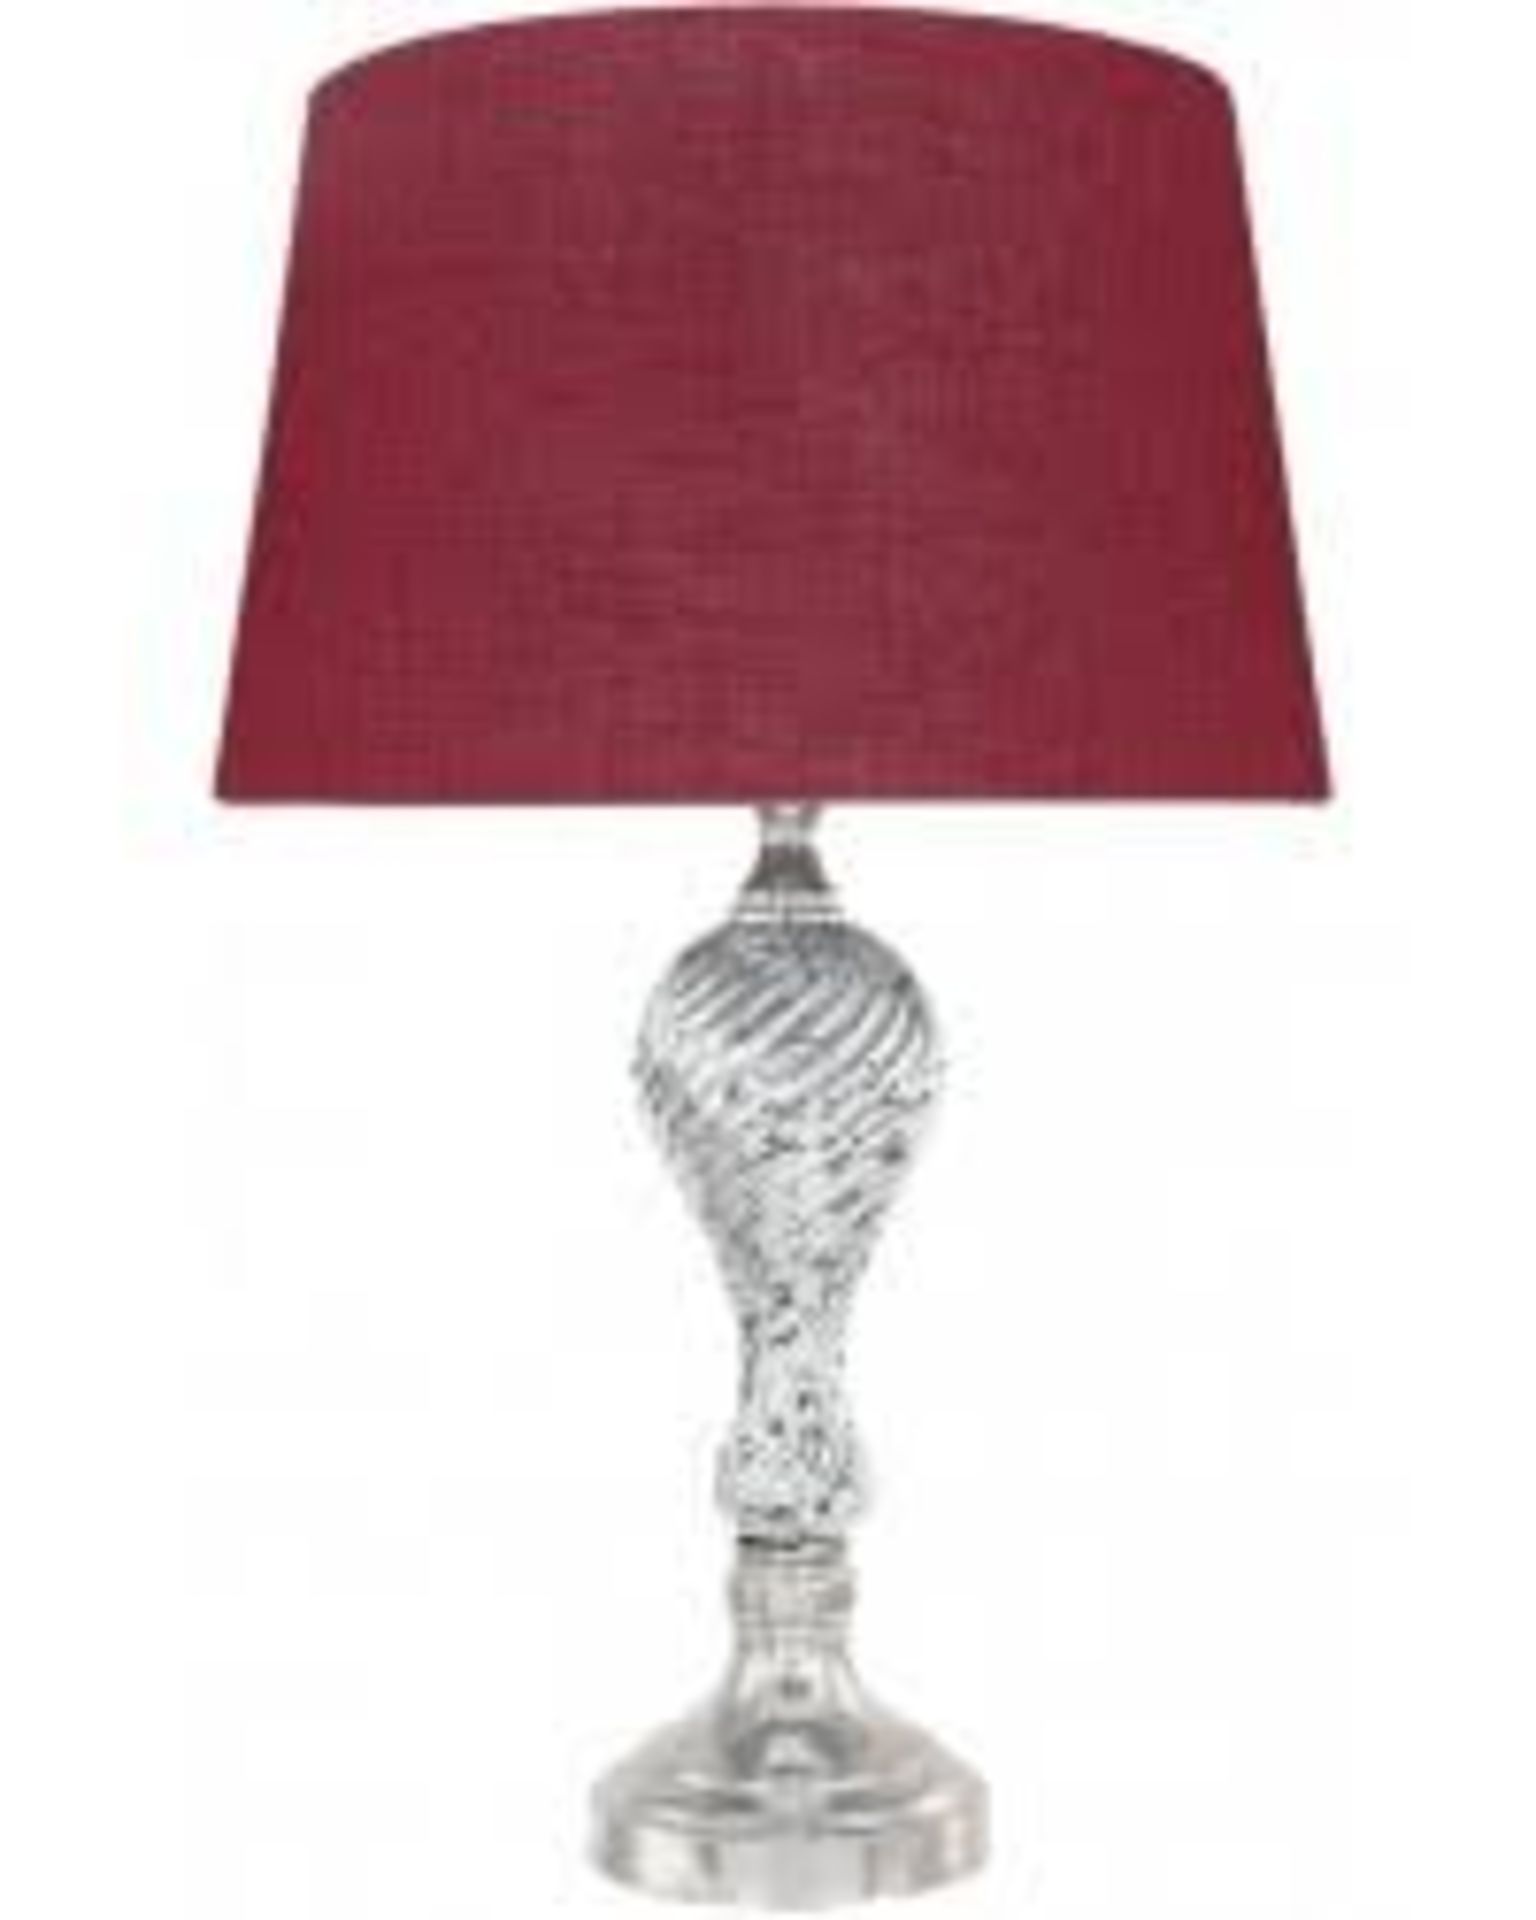 Boxed Home Cimc Glenway Table Lamp RRP £80 (19028) (Pictures Are For Illustration Purposes) (